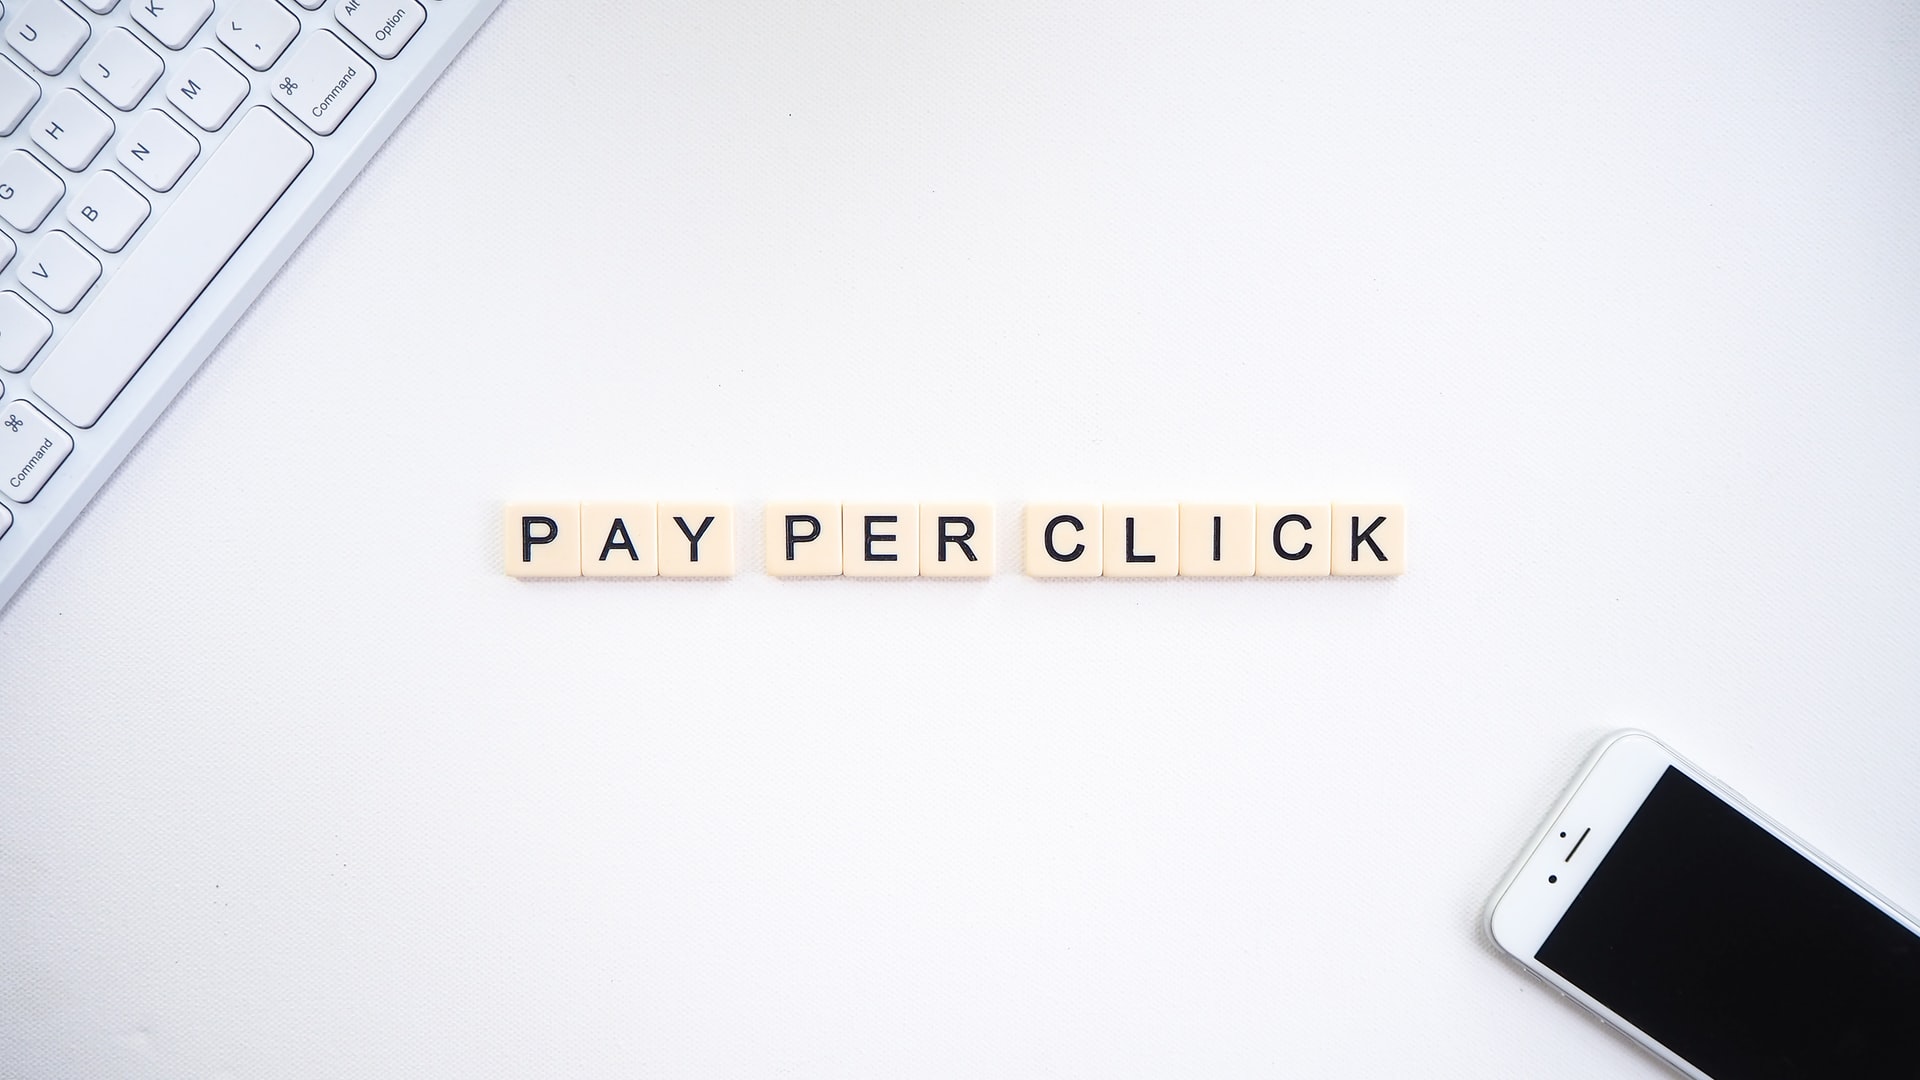 Pay per click in scrabble letters